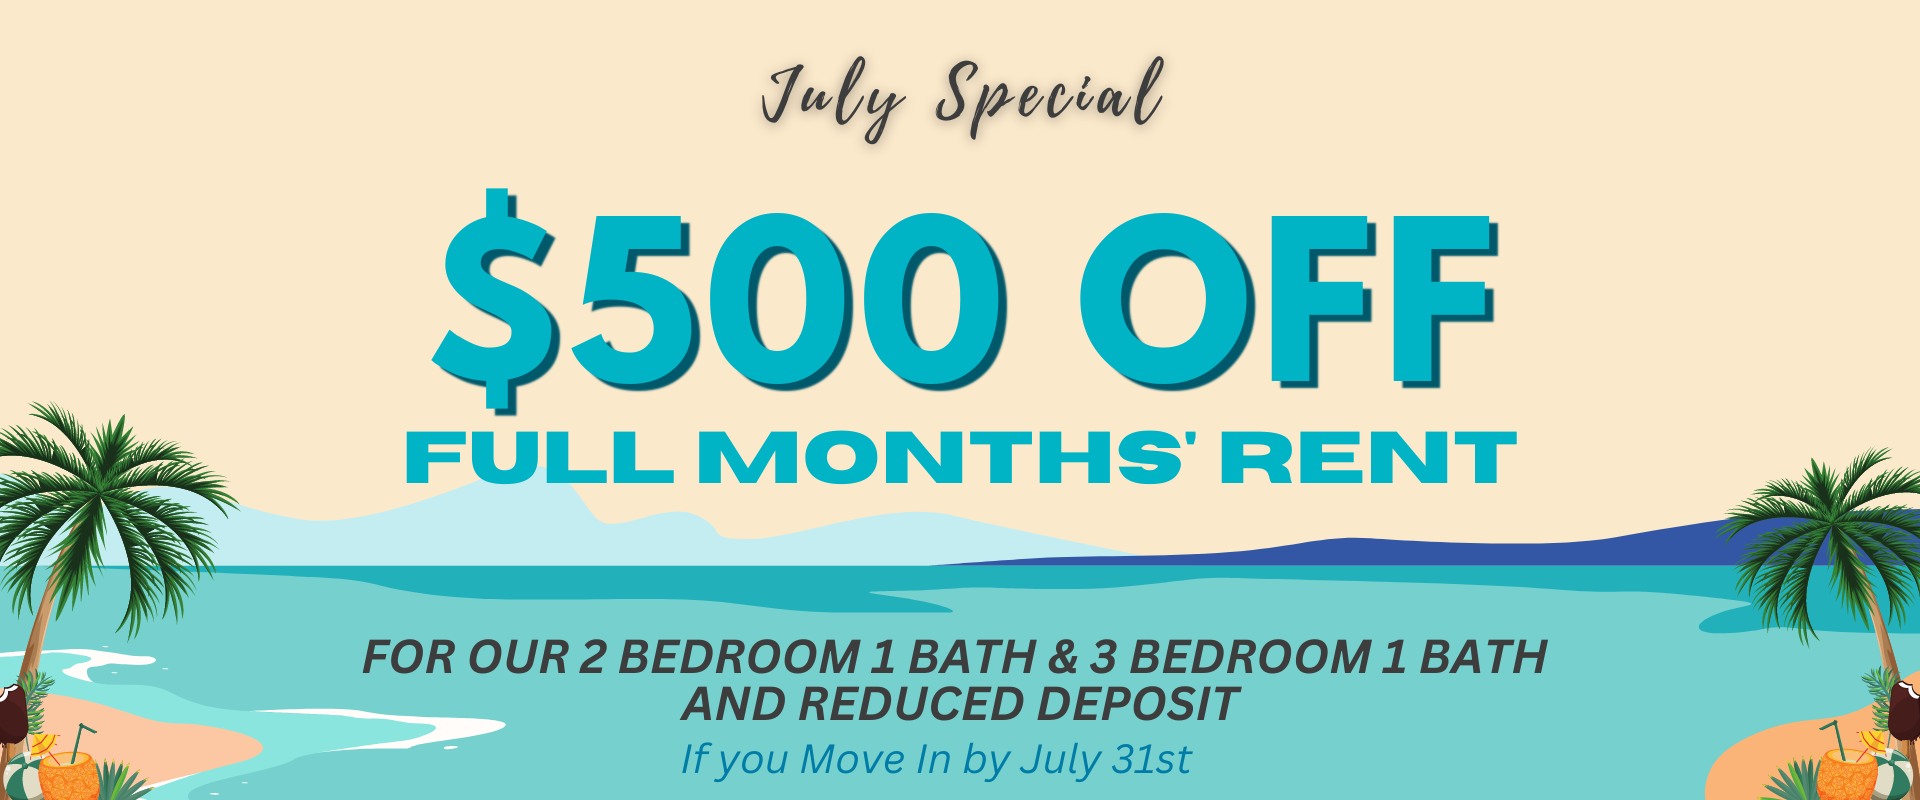 July Special $500 off full months' Rent  for our 2 Bedroom 1 Bath & 3 Bedroom 1 Bath  And Reduced Deposit If you Move in by July 31st